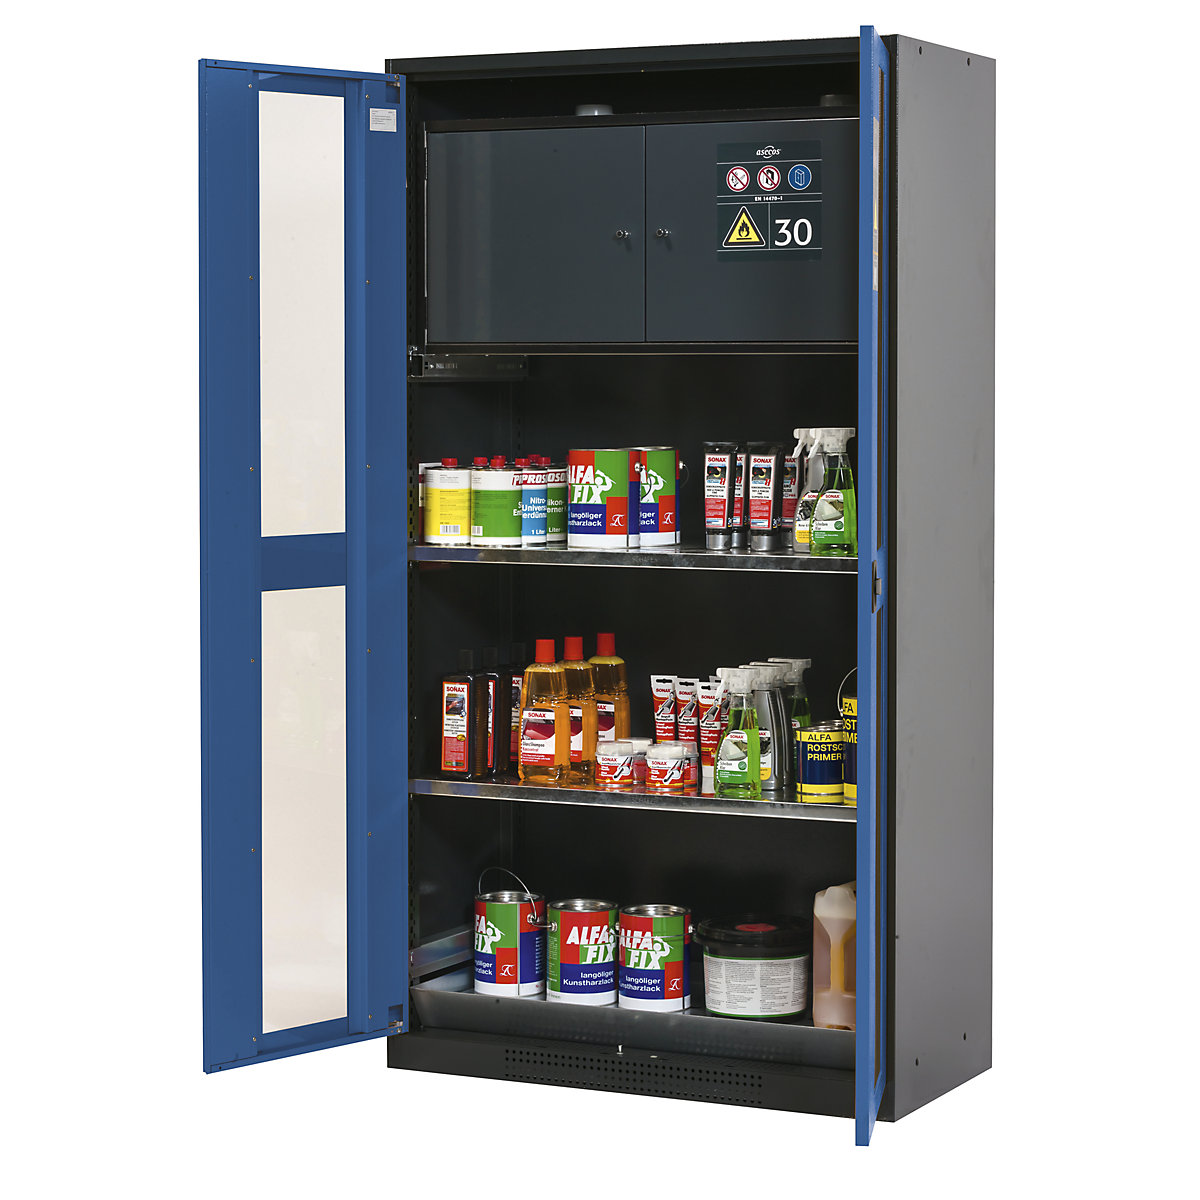 Chemical storage cupboard – asecos